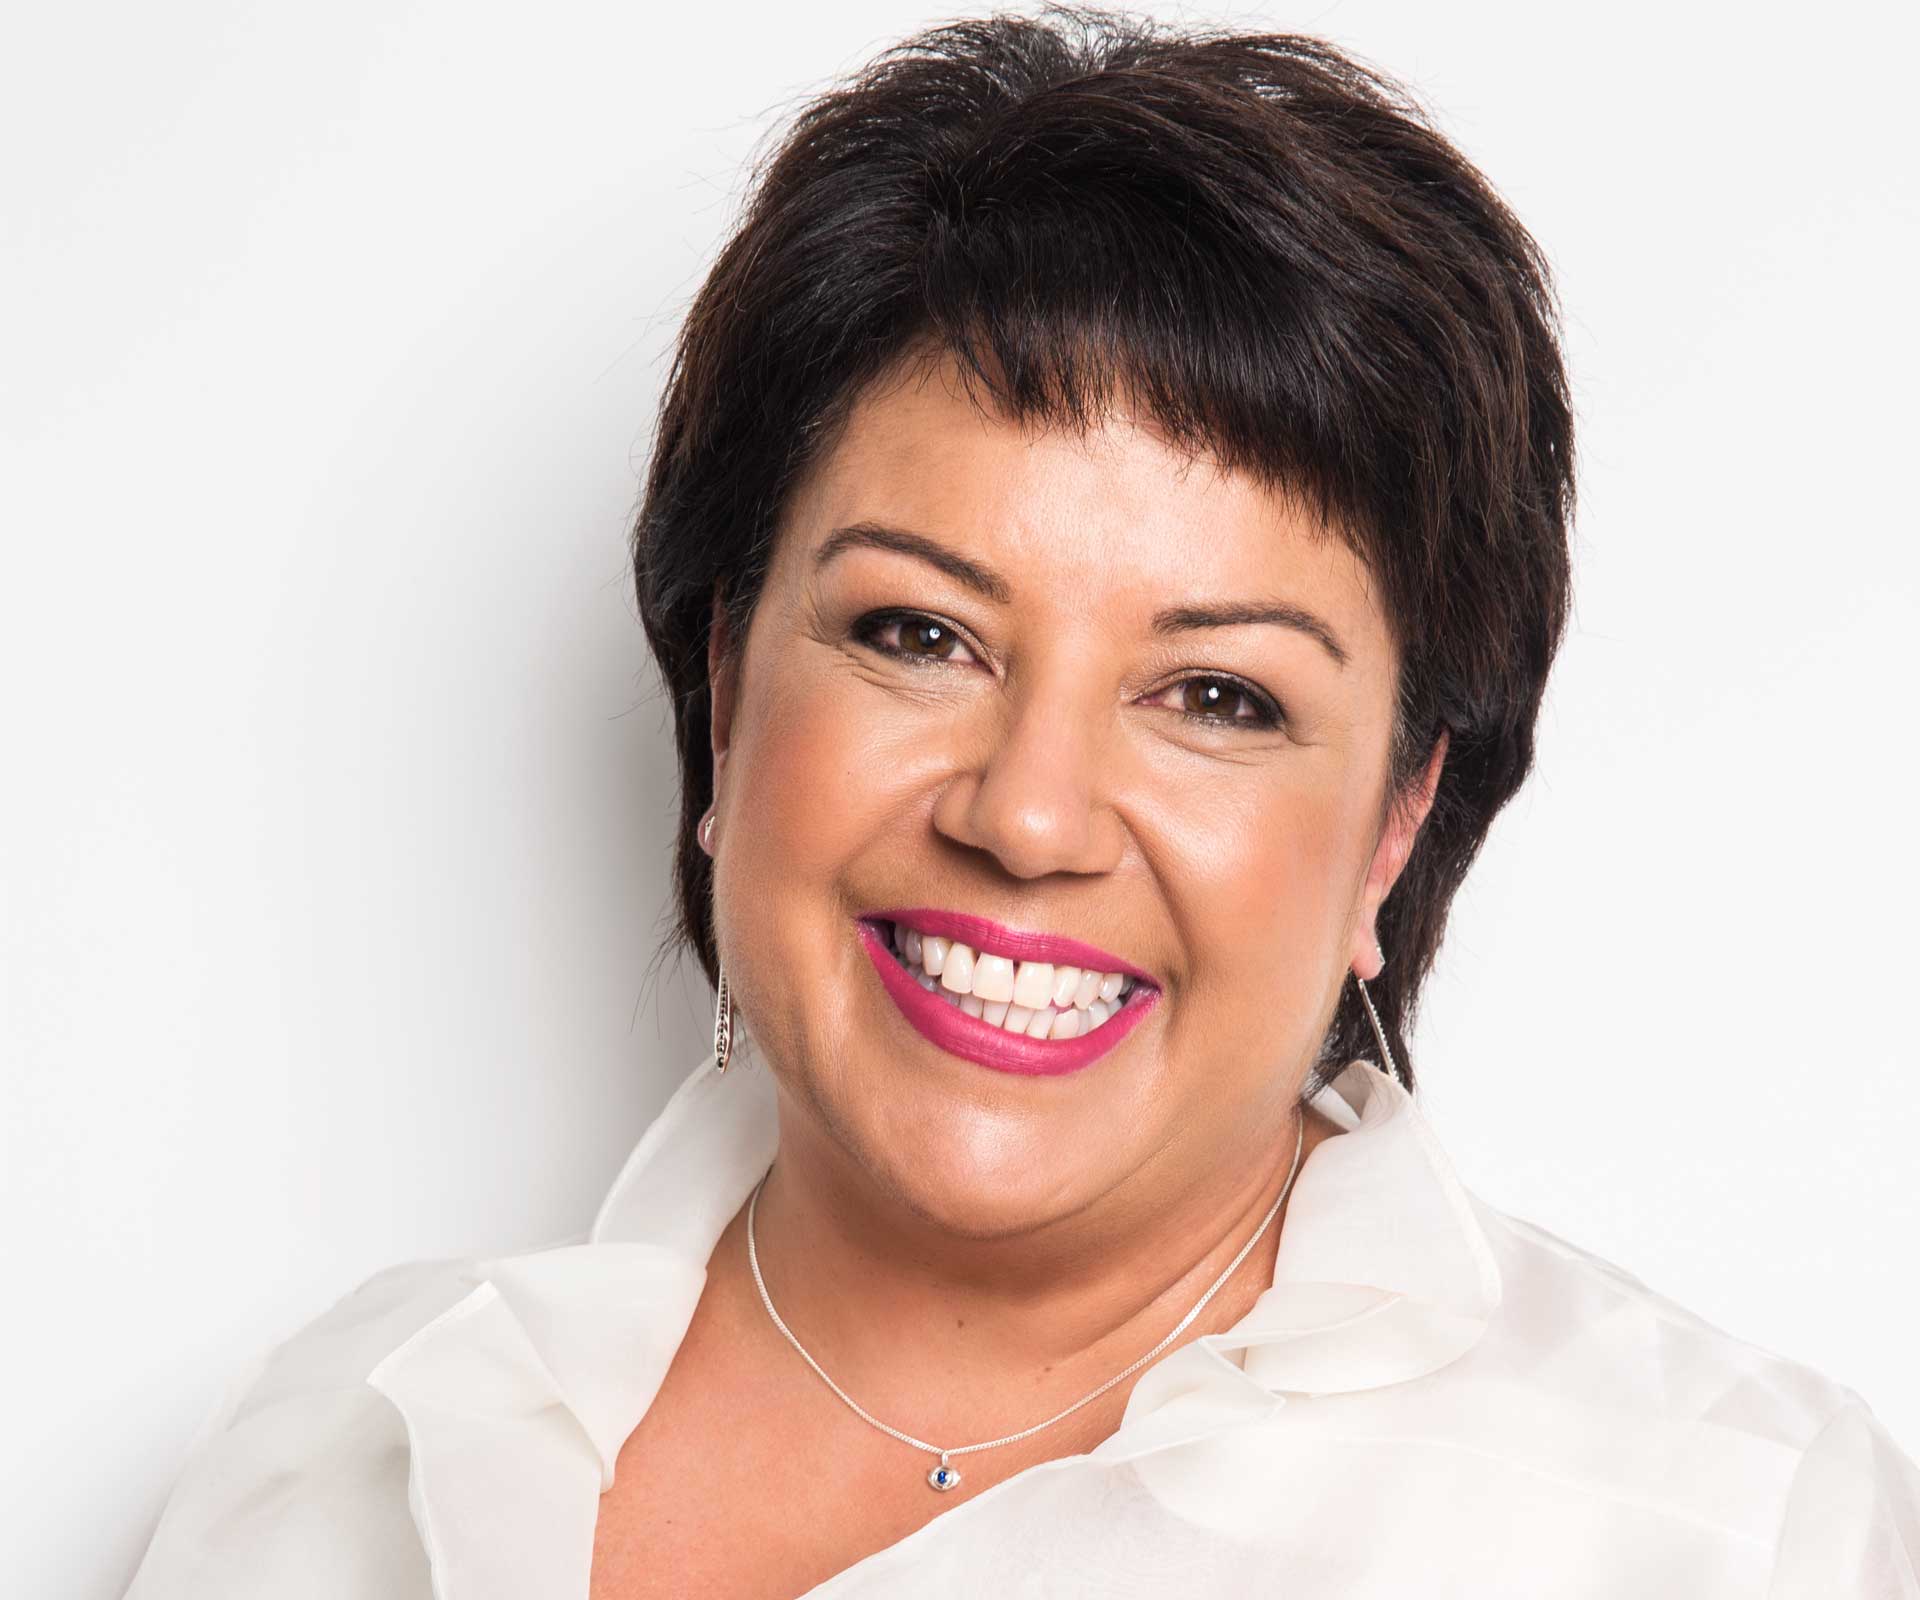 Paula Bennett opens up about love, loss and her wayward teen years